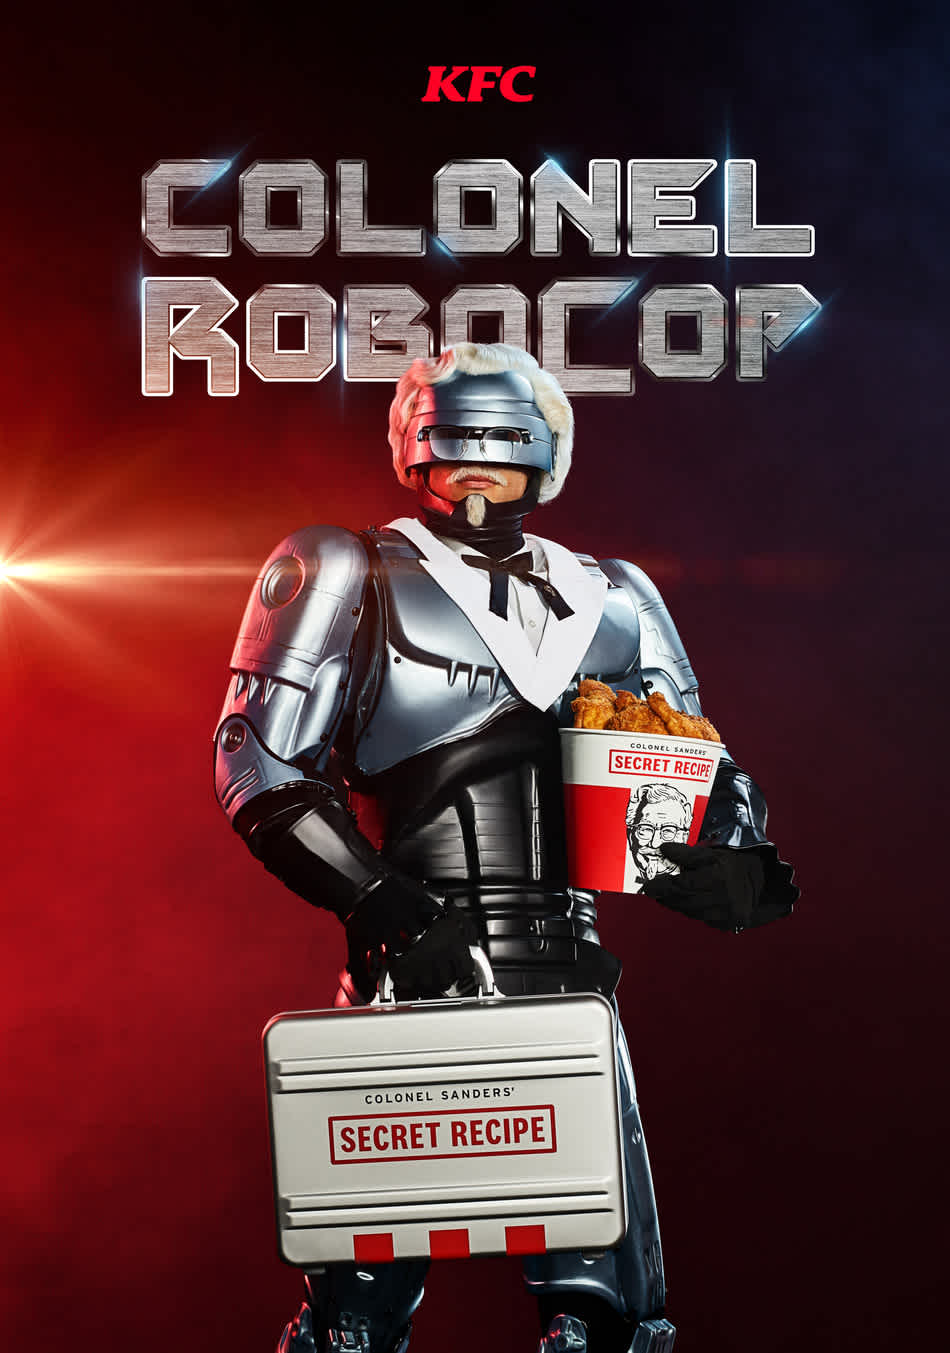 KFC U.S. COMMISSIONS  ROBOCOP AS ITS NEWEST COLONEL-AND GUARDIAN OF ITS COVETED SECRET RECIPE OF 11 HERBS & SPICES